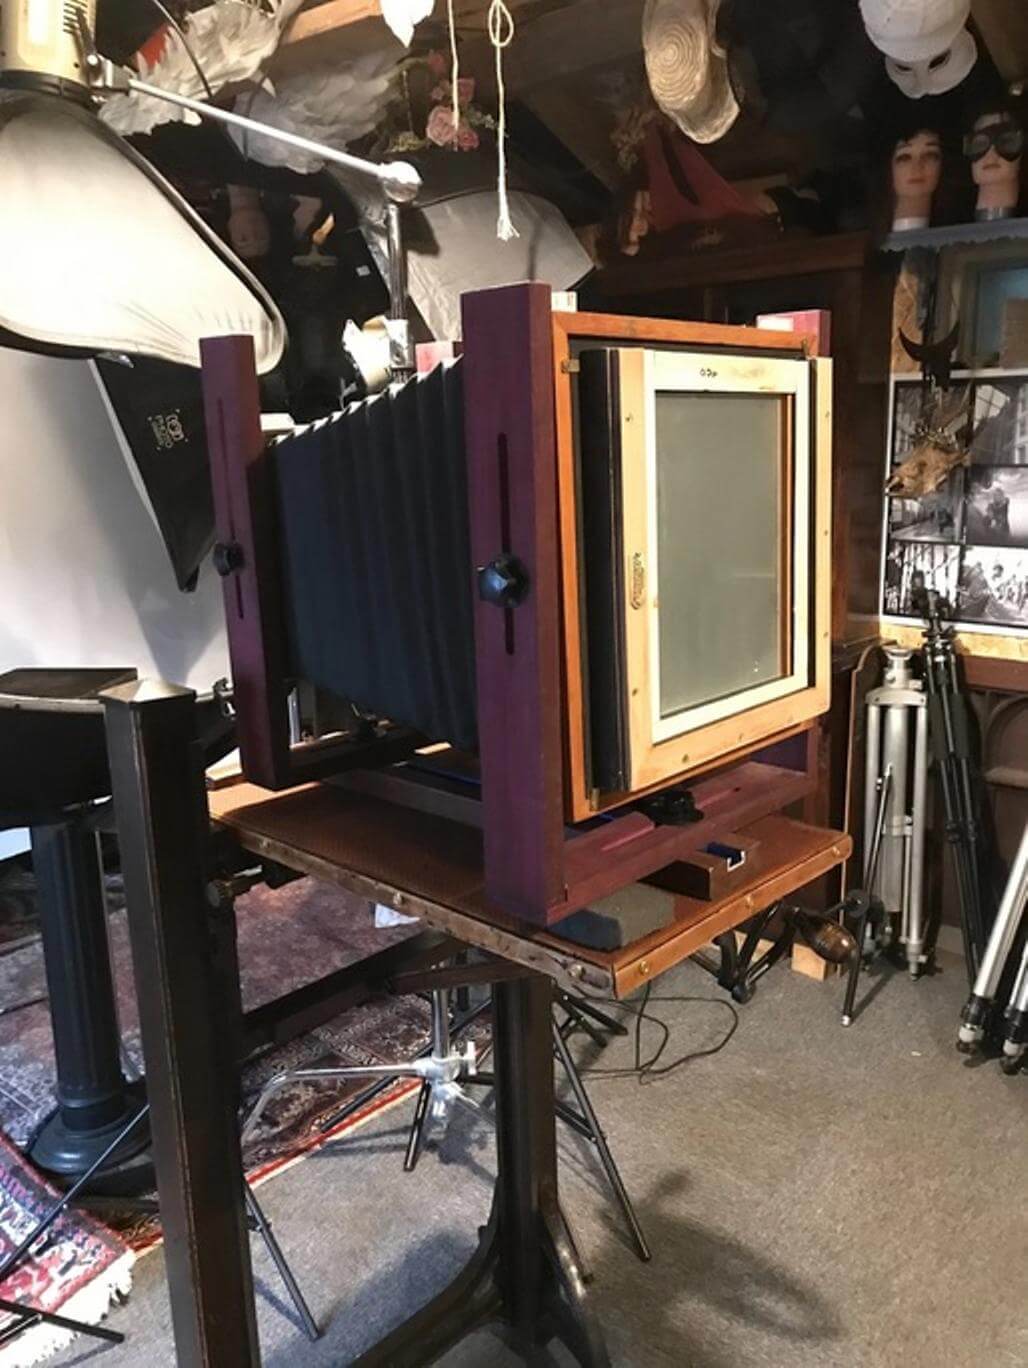 The homemade 8x10 wet place lockdown camera